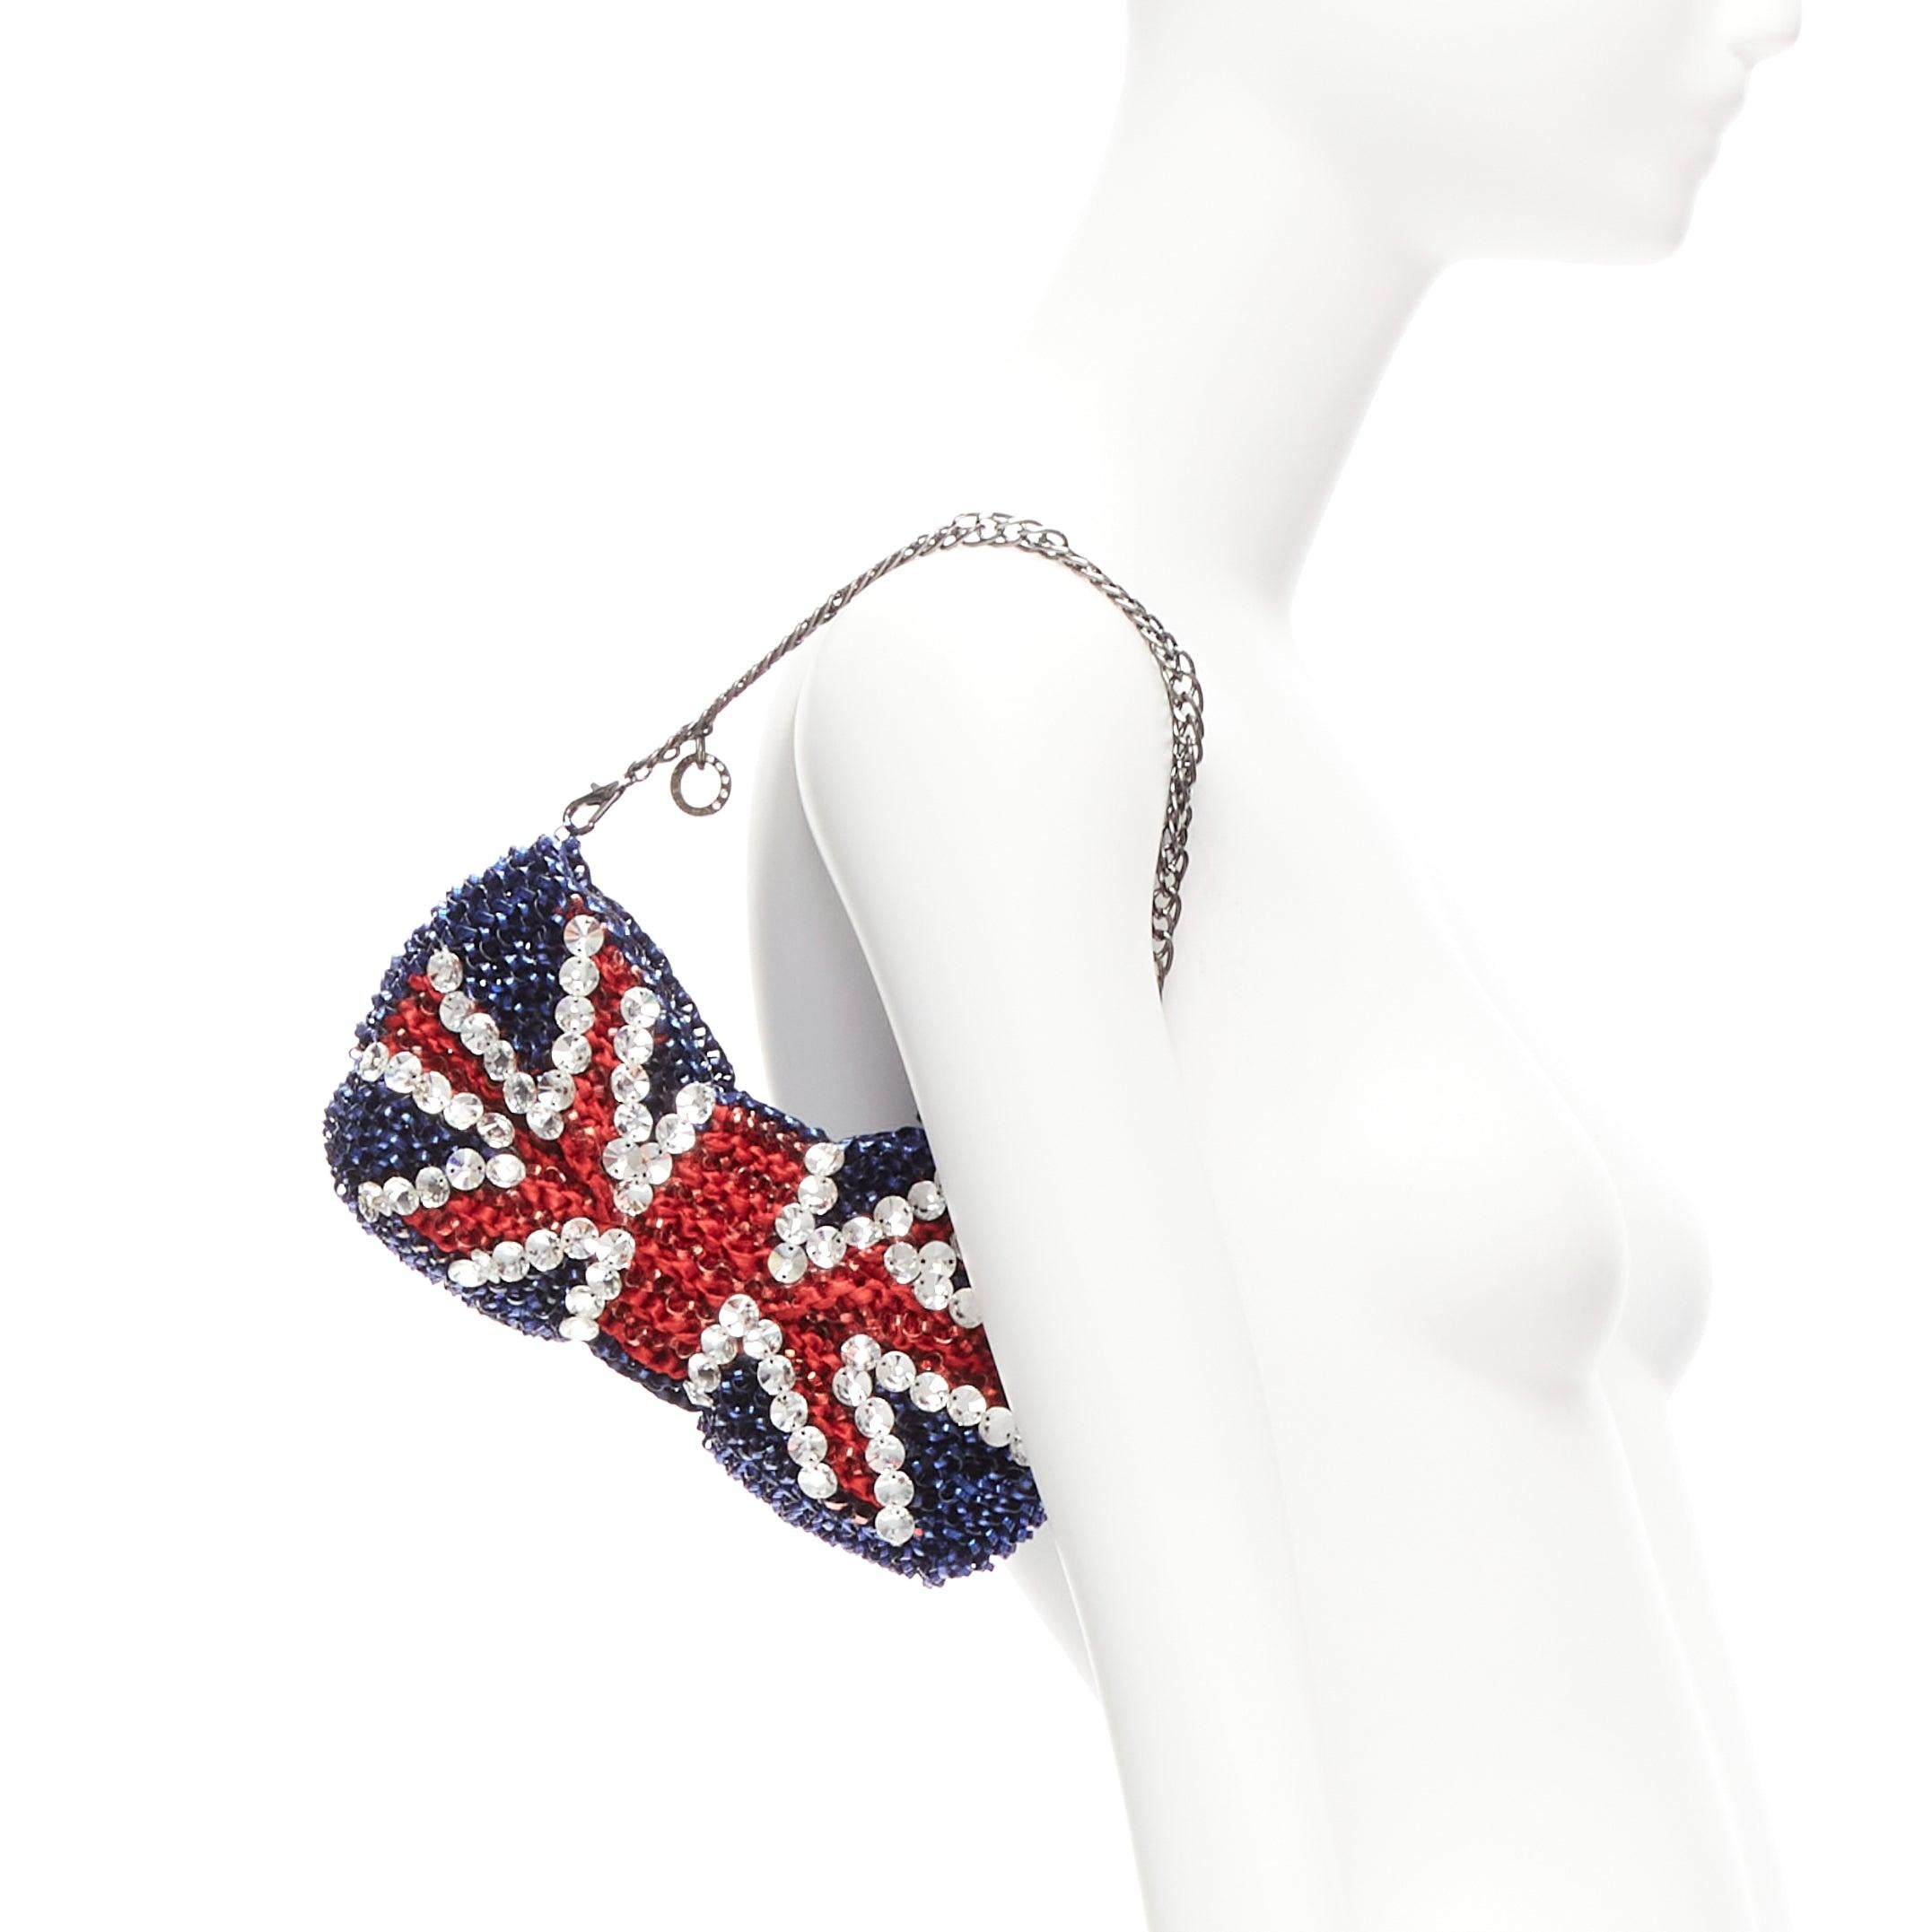 ANTEPRIMA Wire Bag British Union Jack crystal embellished bow clutch
Reference: ANWU/A01067
Brand: Anteprima
Collection: Wire Bag
Material: Plastic
Color: Red, Blue
Pattern: Ethnic
Closure: Zip
Extra Details: Clear crystal embellishments. Crossbody